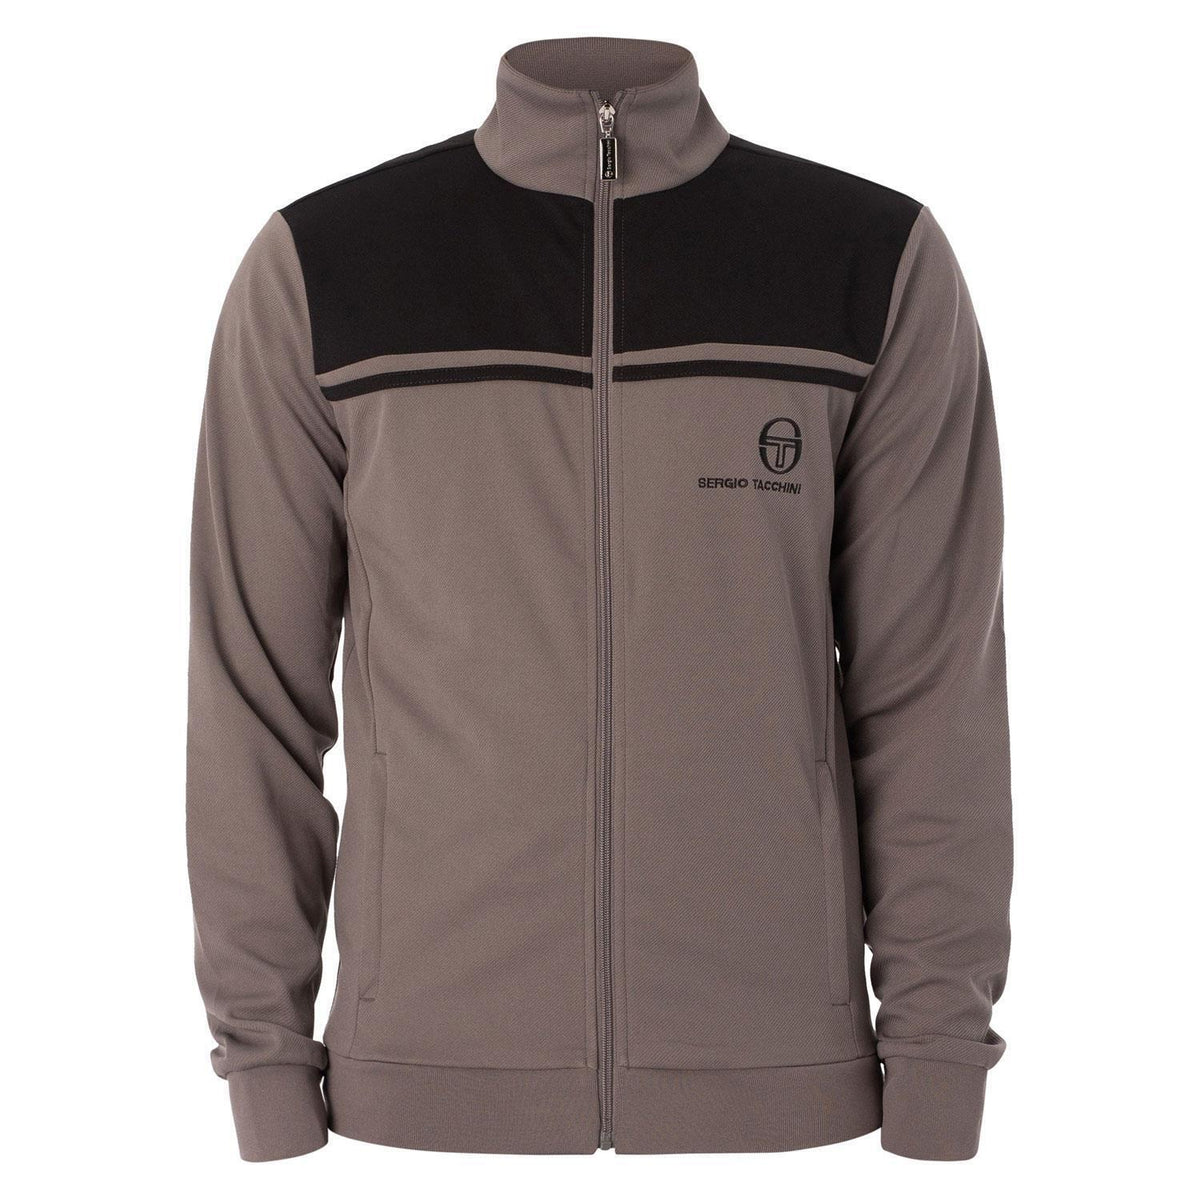 Sergio Tacchini Mens New Young Line Track Jacket